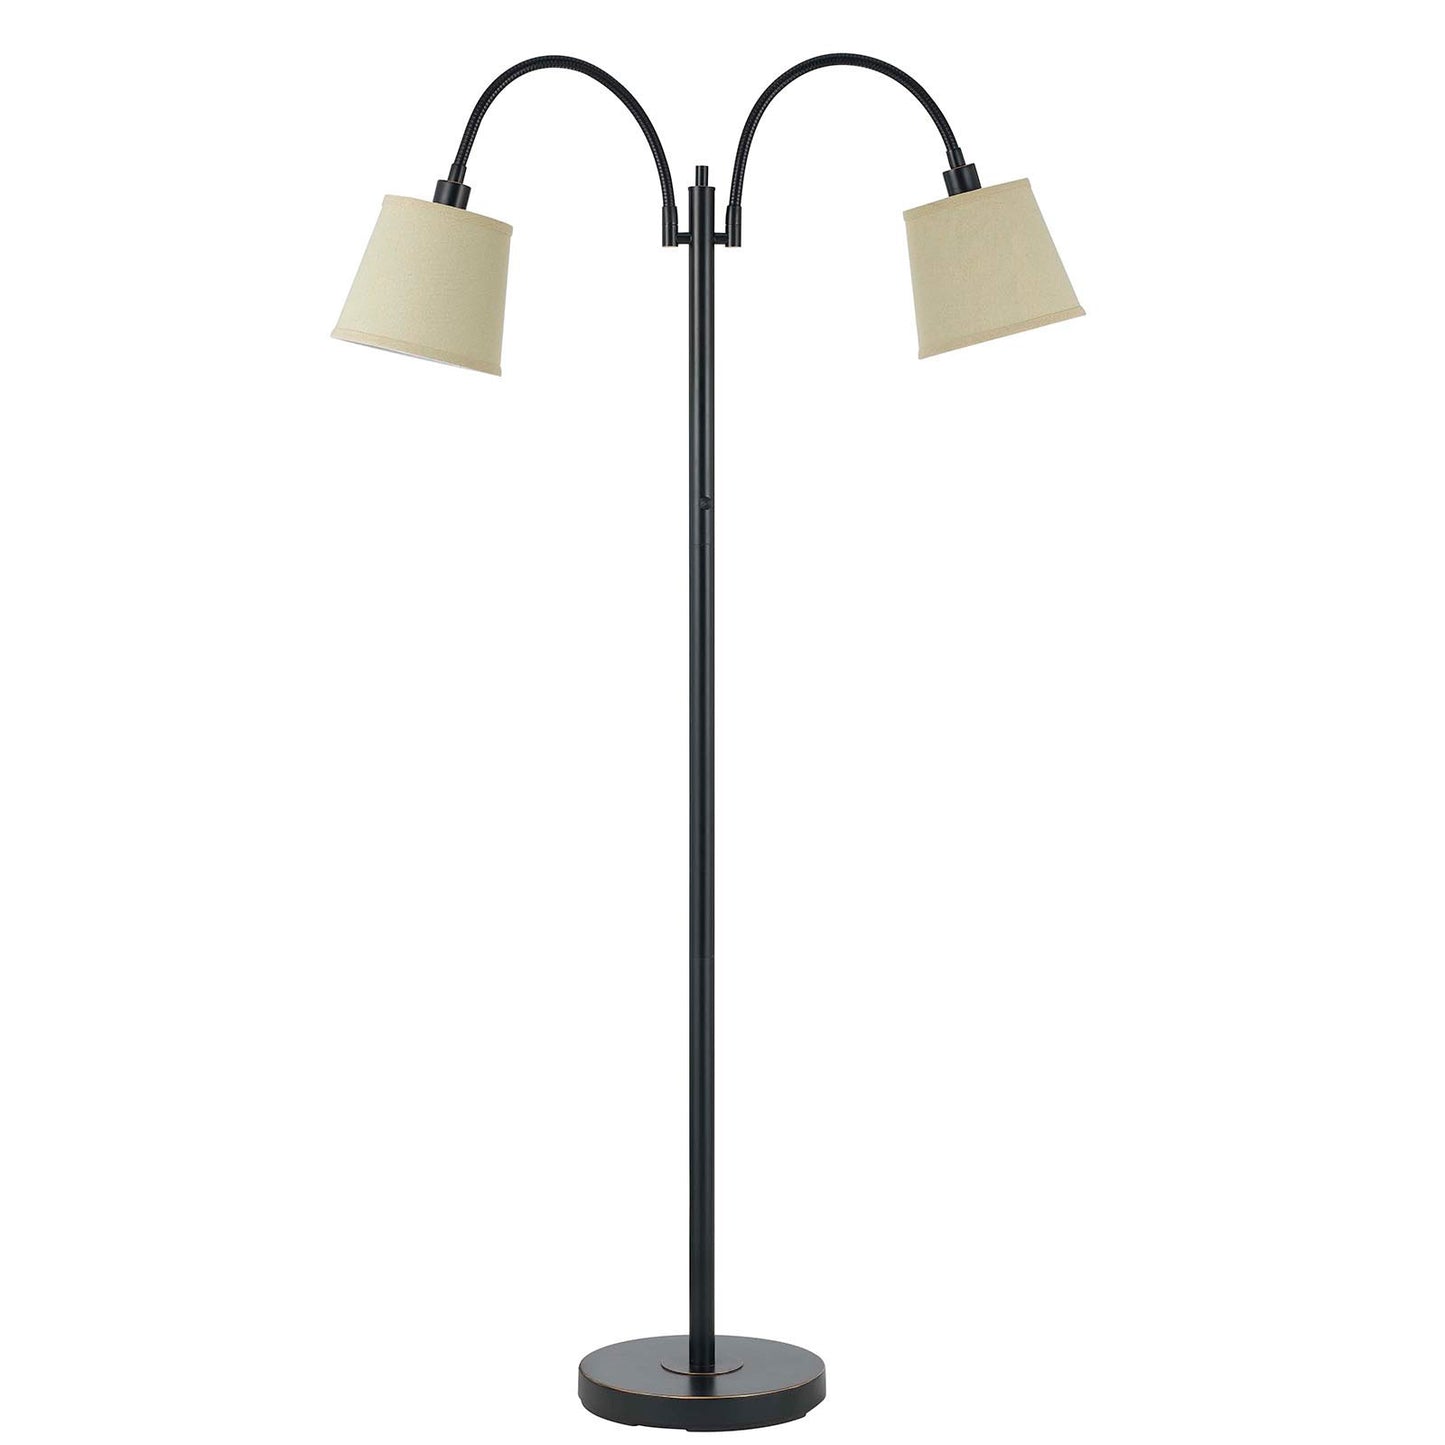 65" Bronze Two Light Traditional Shaped Floor Lamp With Tan Square Shade